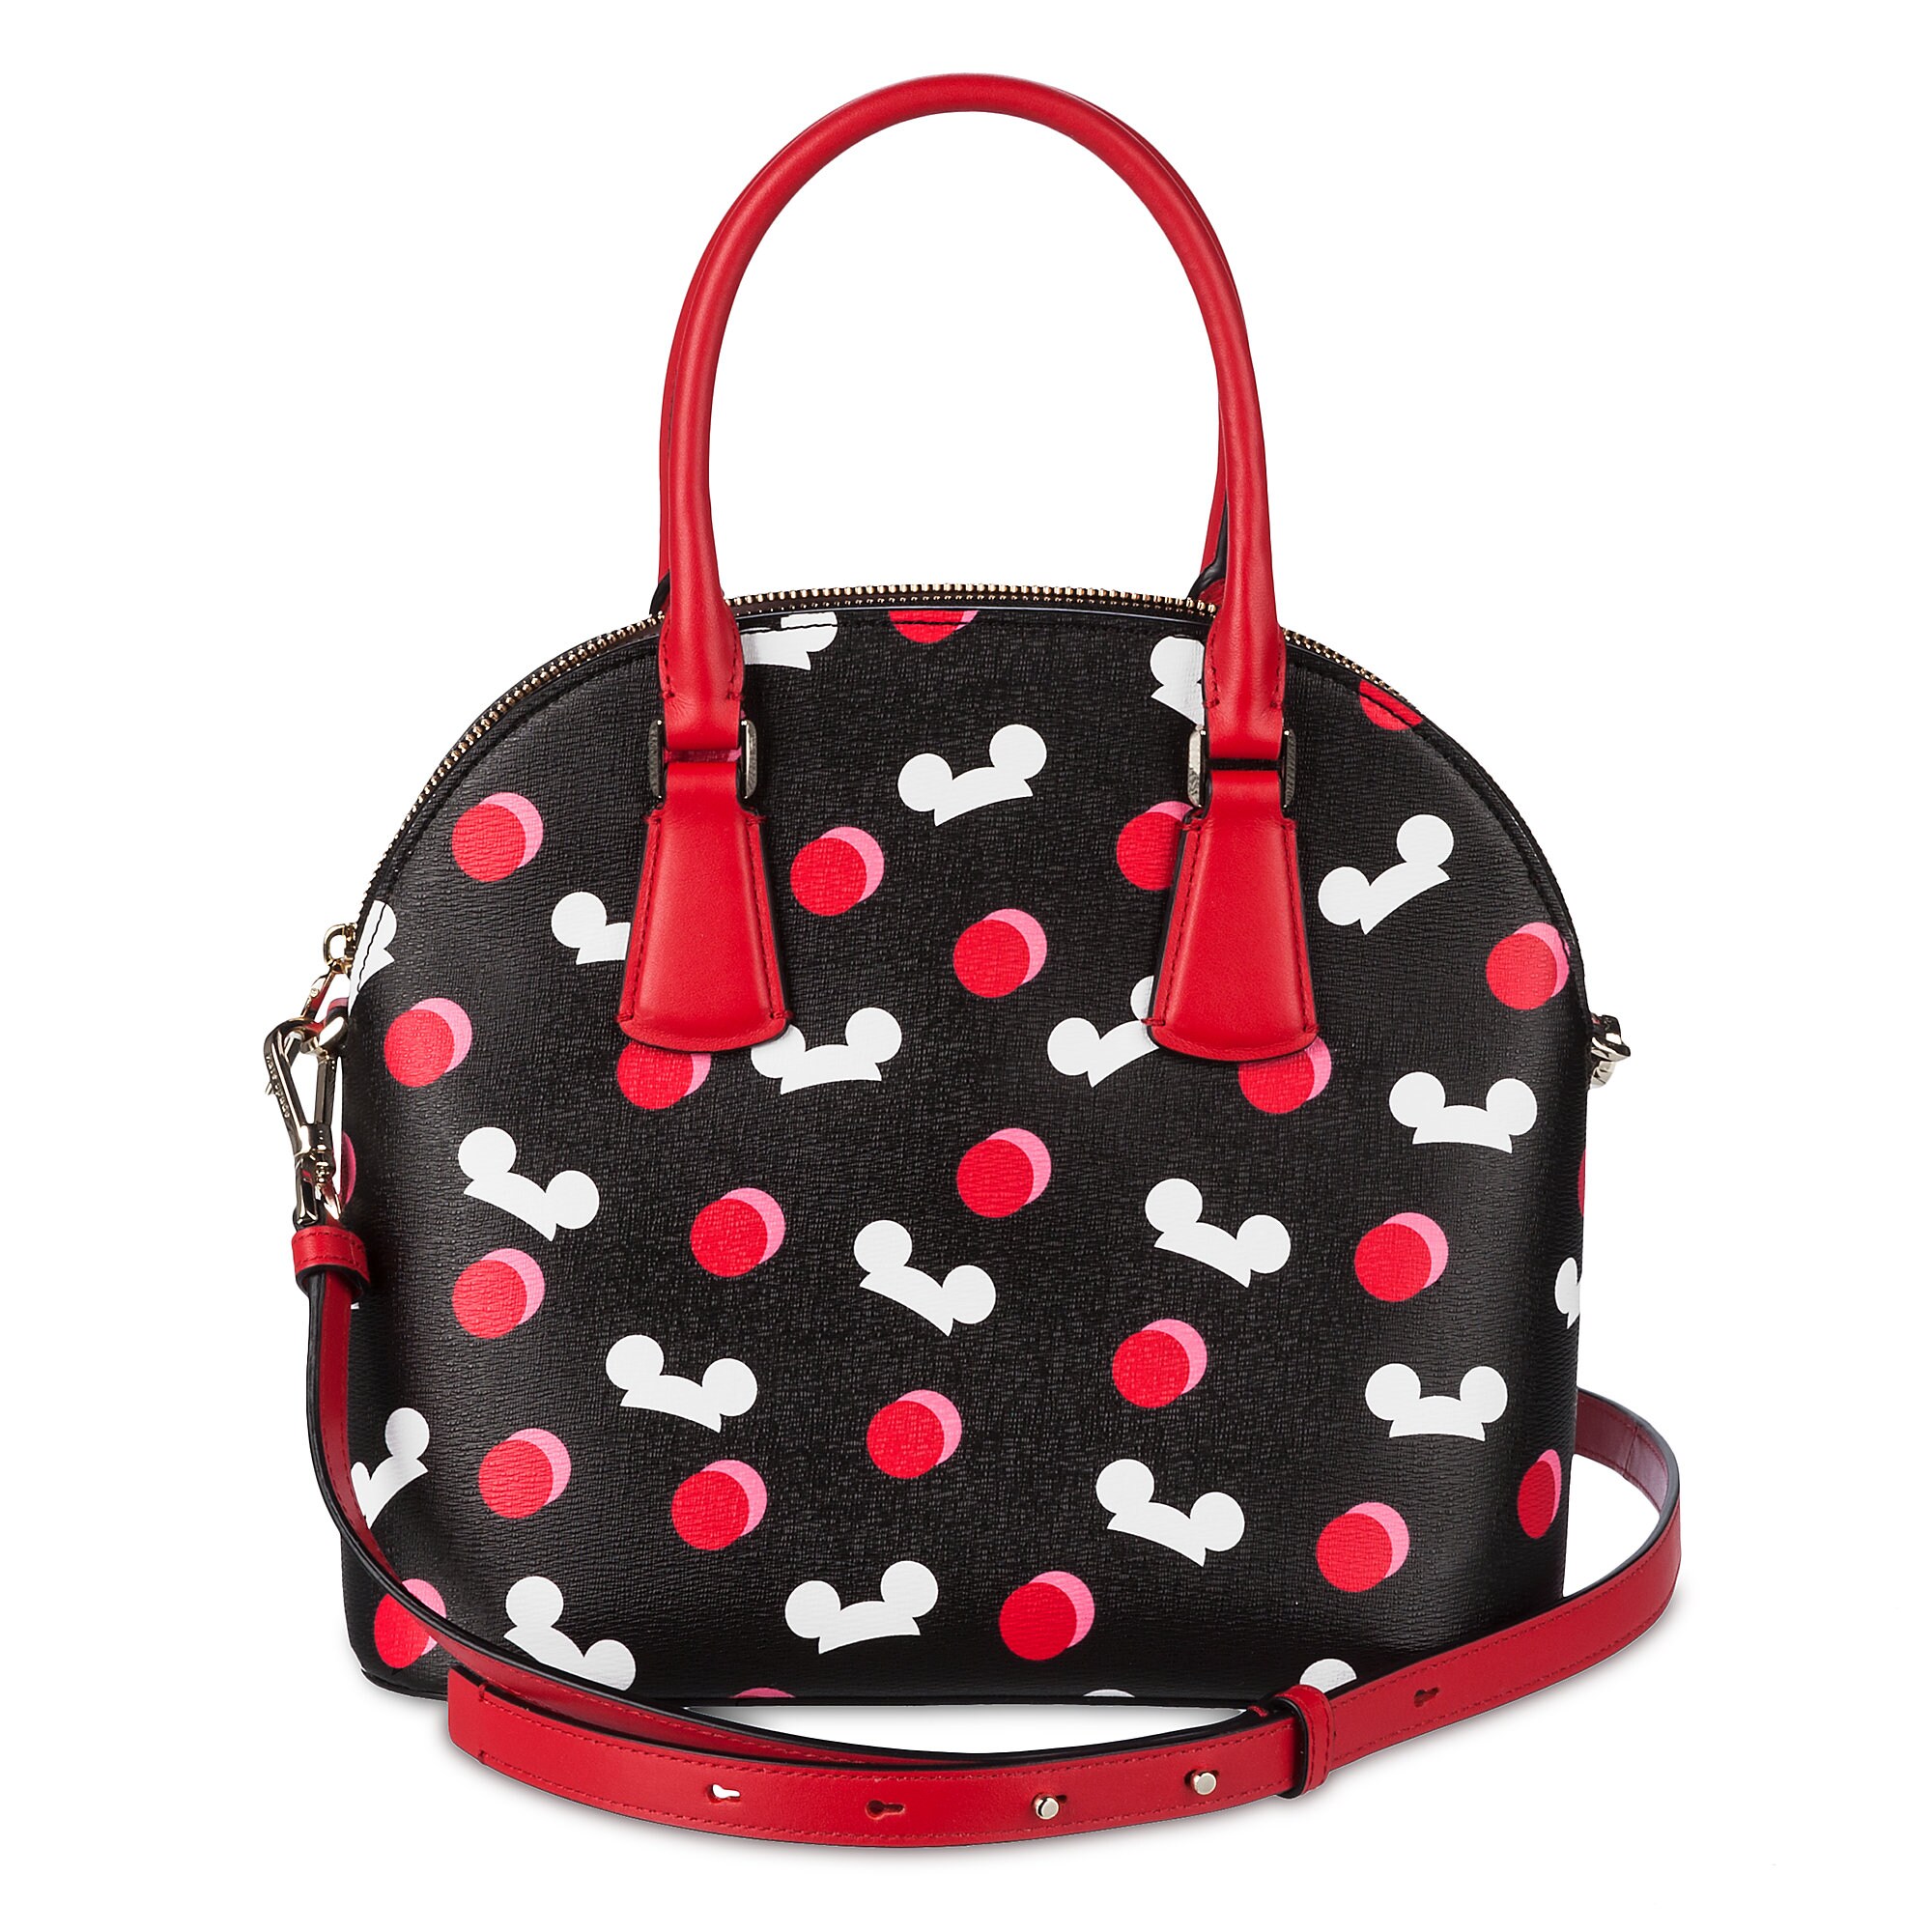 Mickey Mouse Ear Hat Satchel by kate spade new york - Black